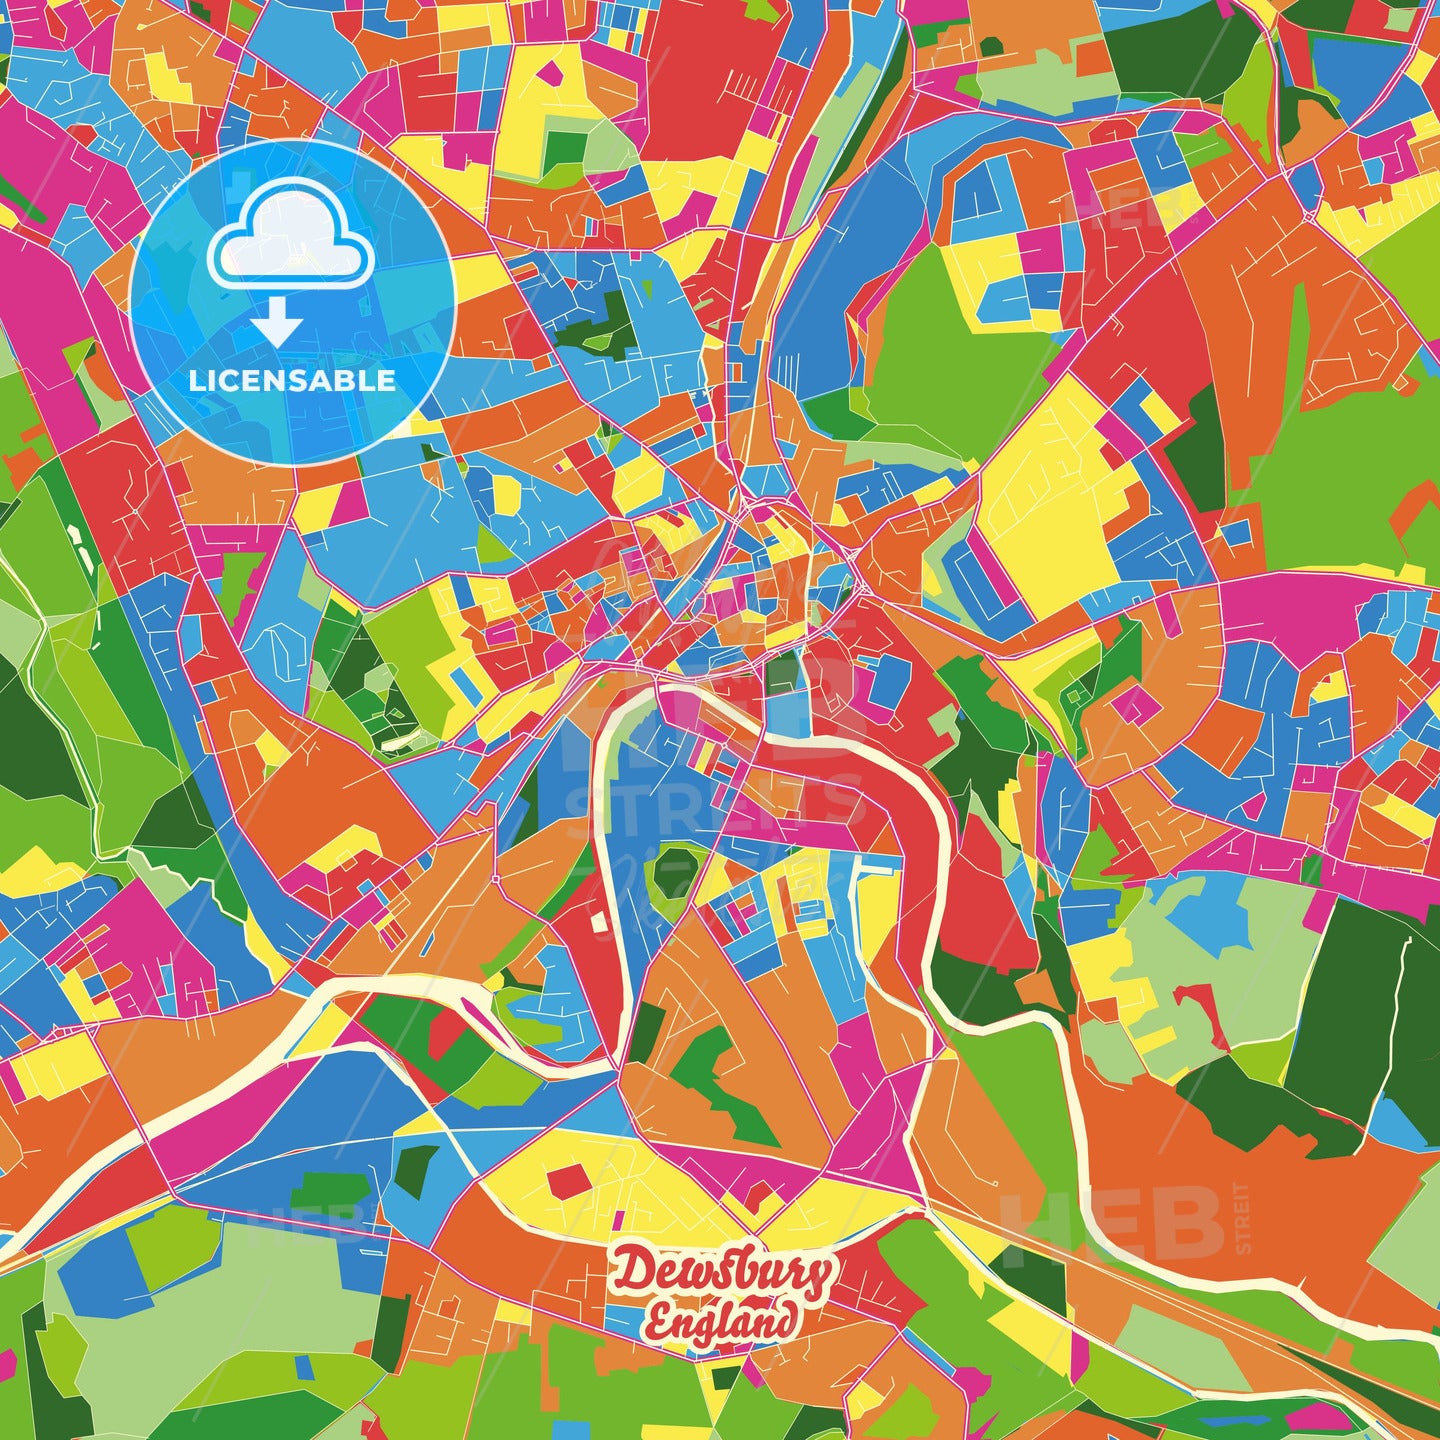 Dewsbury, England Crazy Colorful Street Map Poster Template - HEBSTREITS Sketches